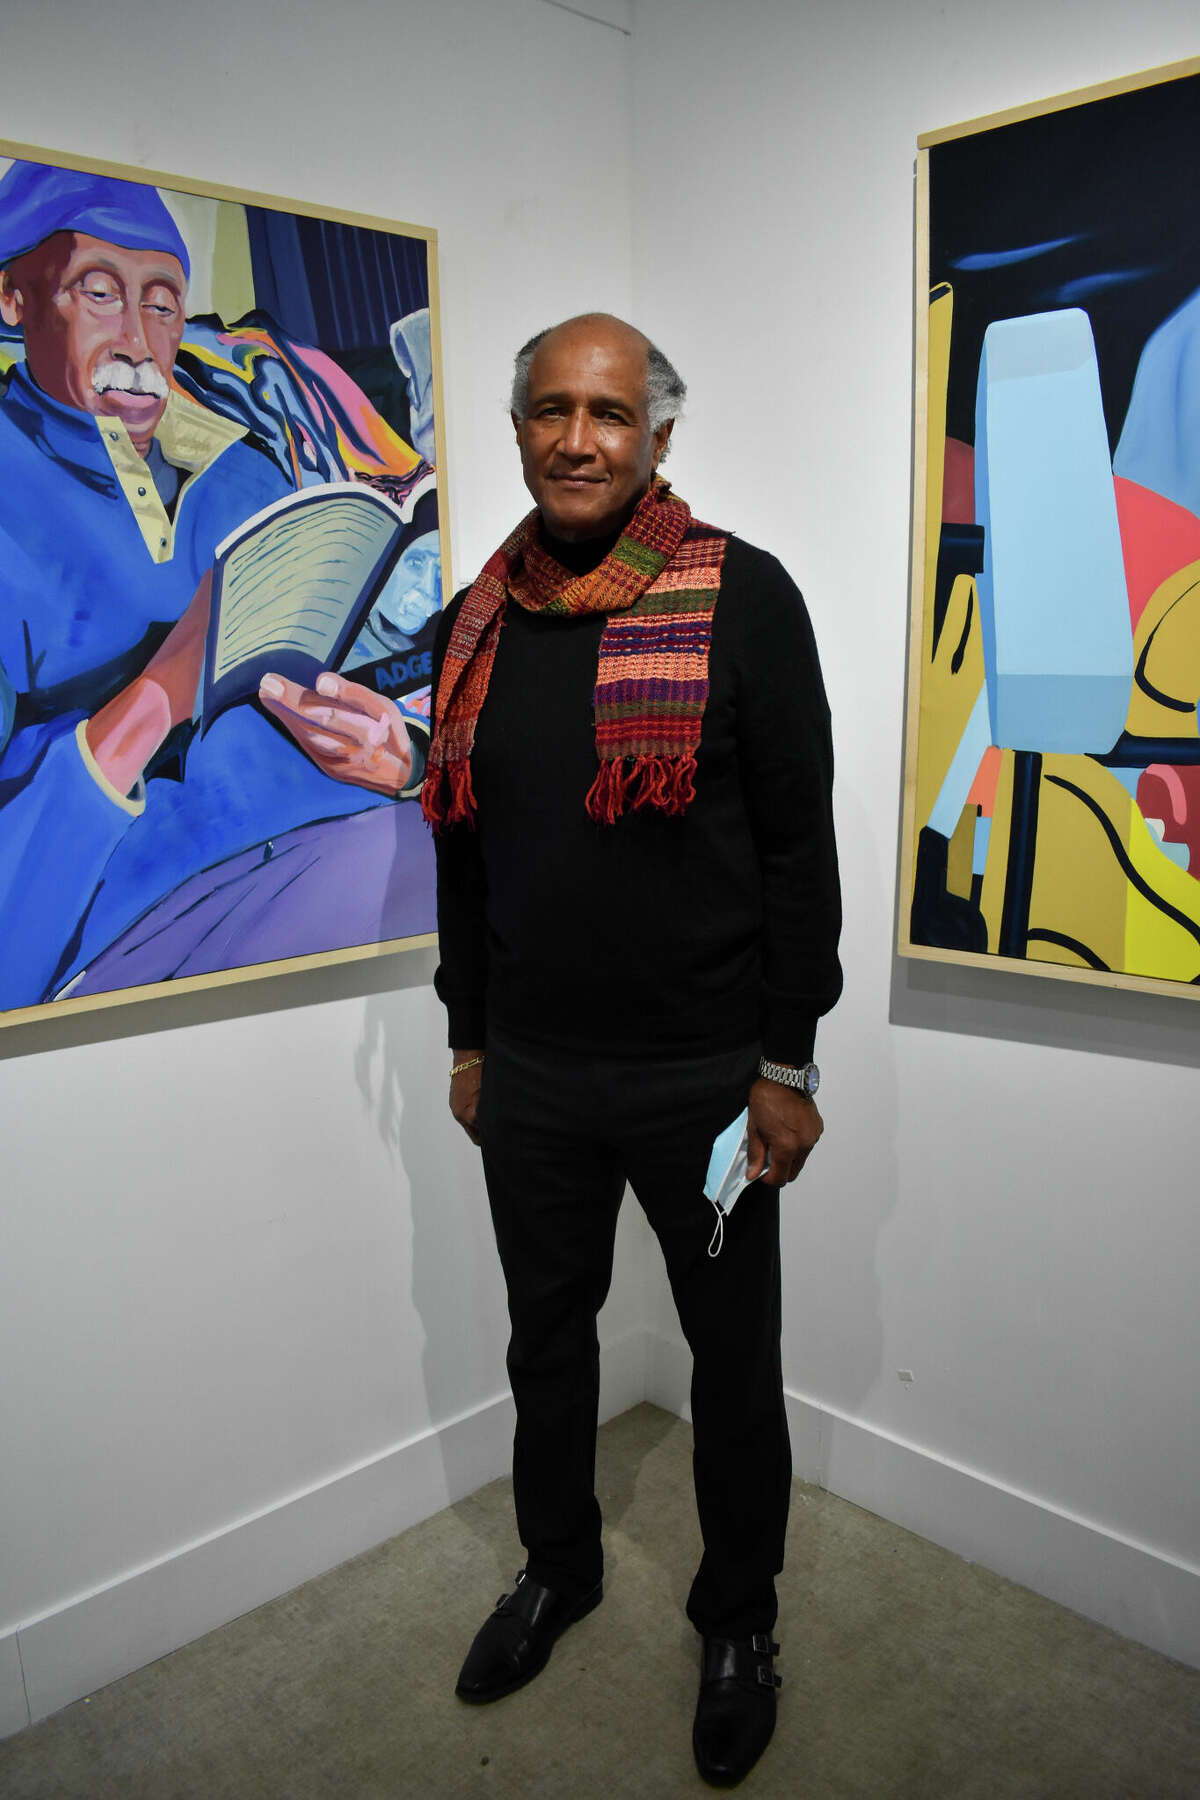 Larry Morse, curator of the exhibit "Absorption and Reflection" that showcased several of his paintings including his collection "Black Men Reading," on the artists' reception at City Lights Gallery on Feb. 20, 2022. 